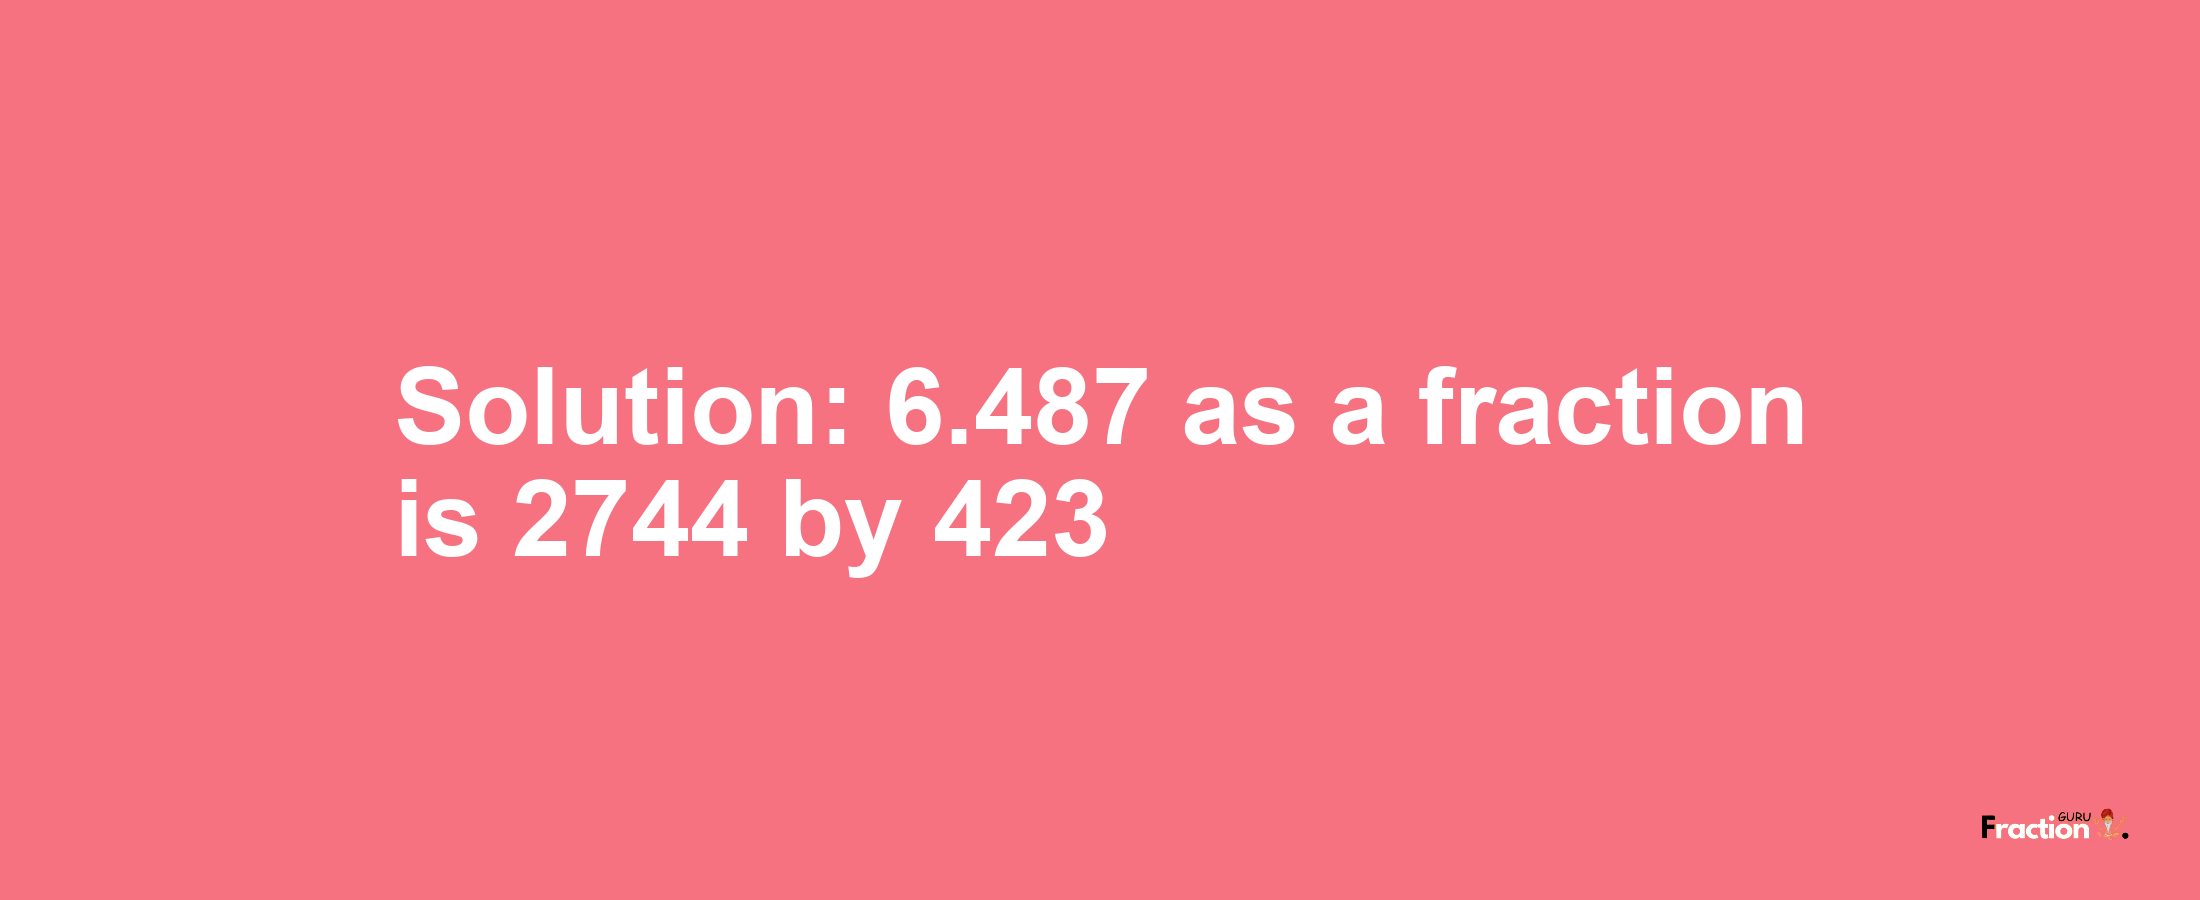 Solution:6.487 as a fraction is 2744/423